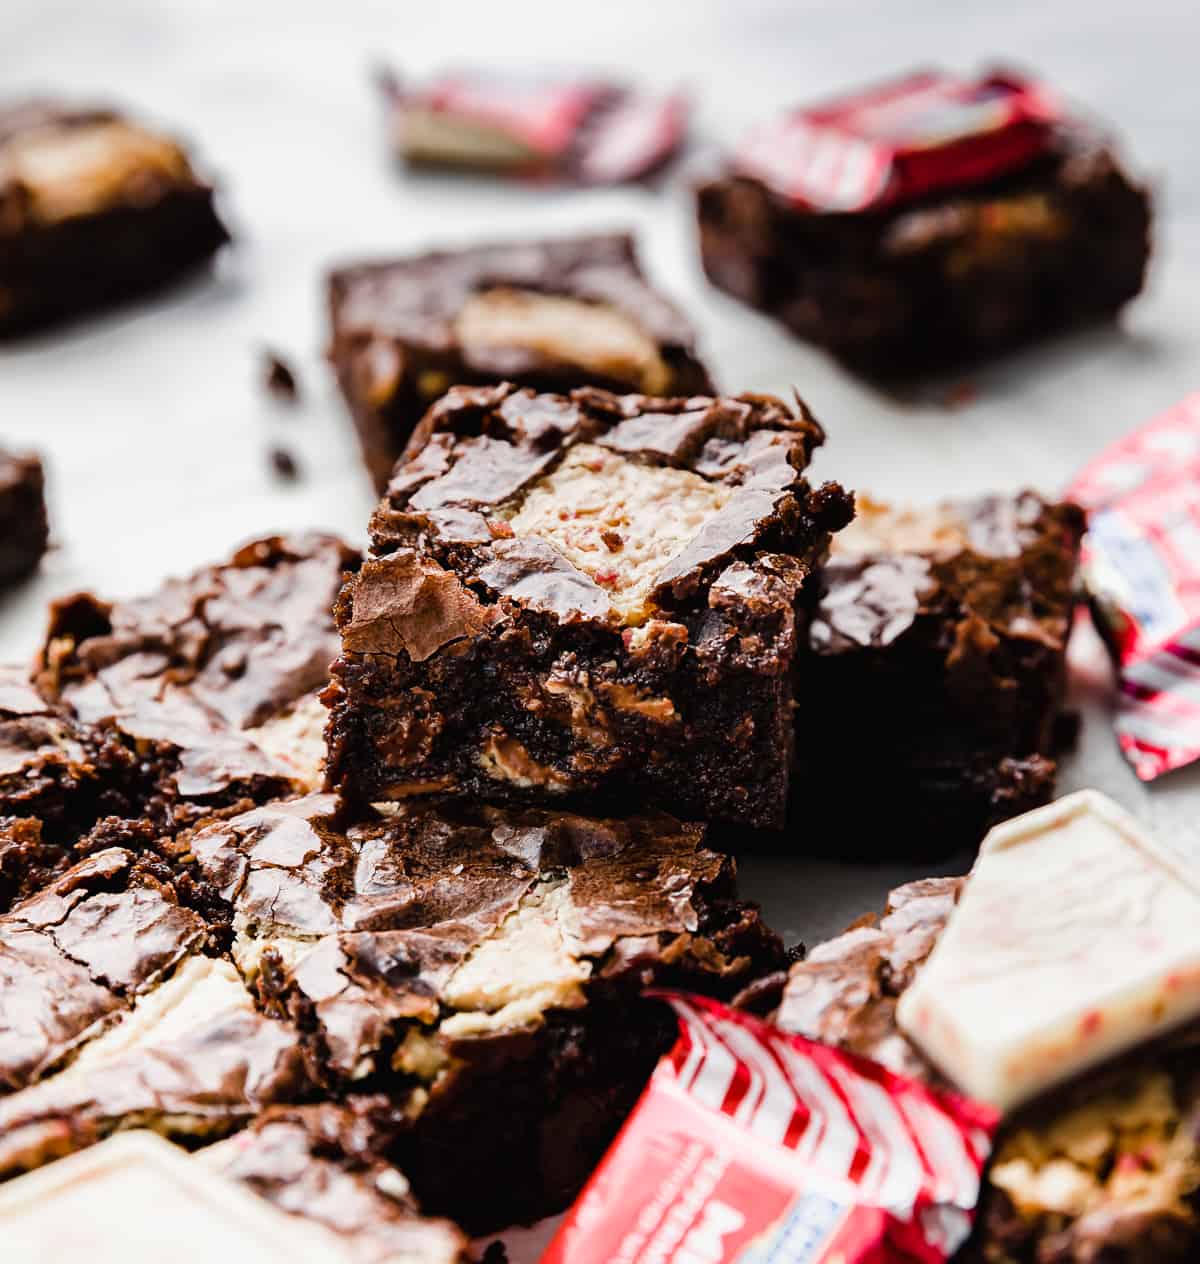 Squares of Peppermint Bark Brownies made from Ghirardelli brownie mix, on a white background with red peppermint bark packaging surrounding the brownies.